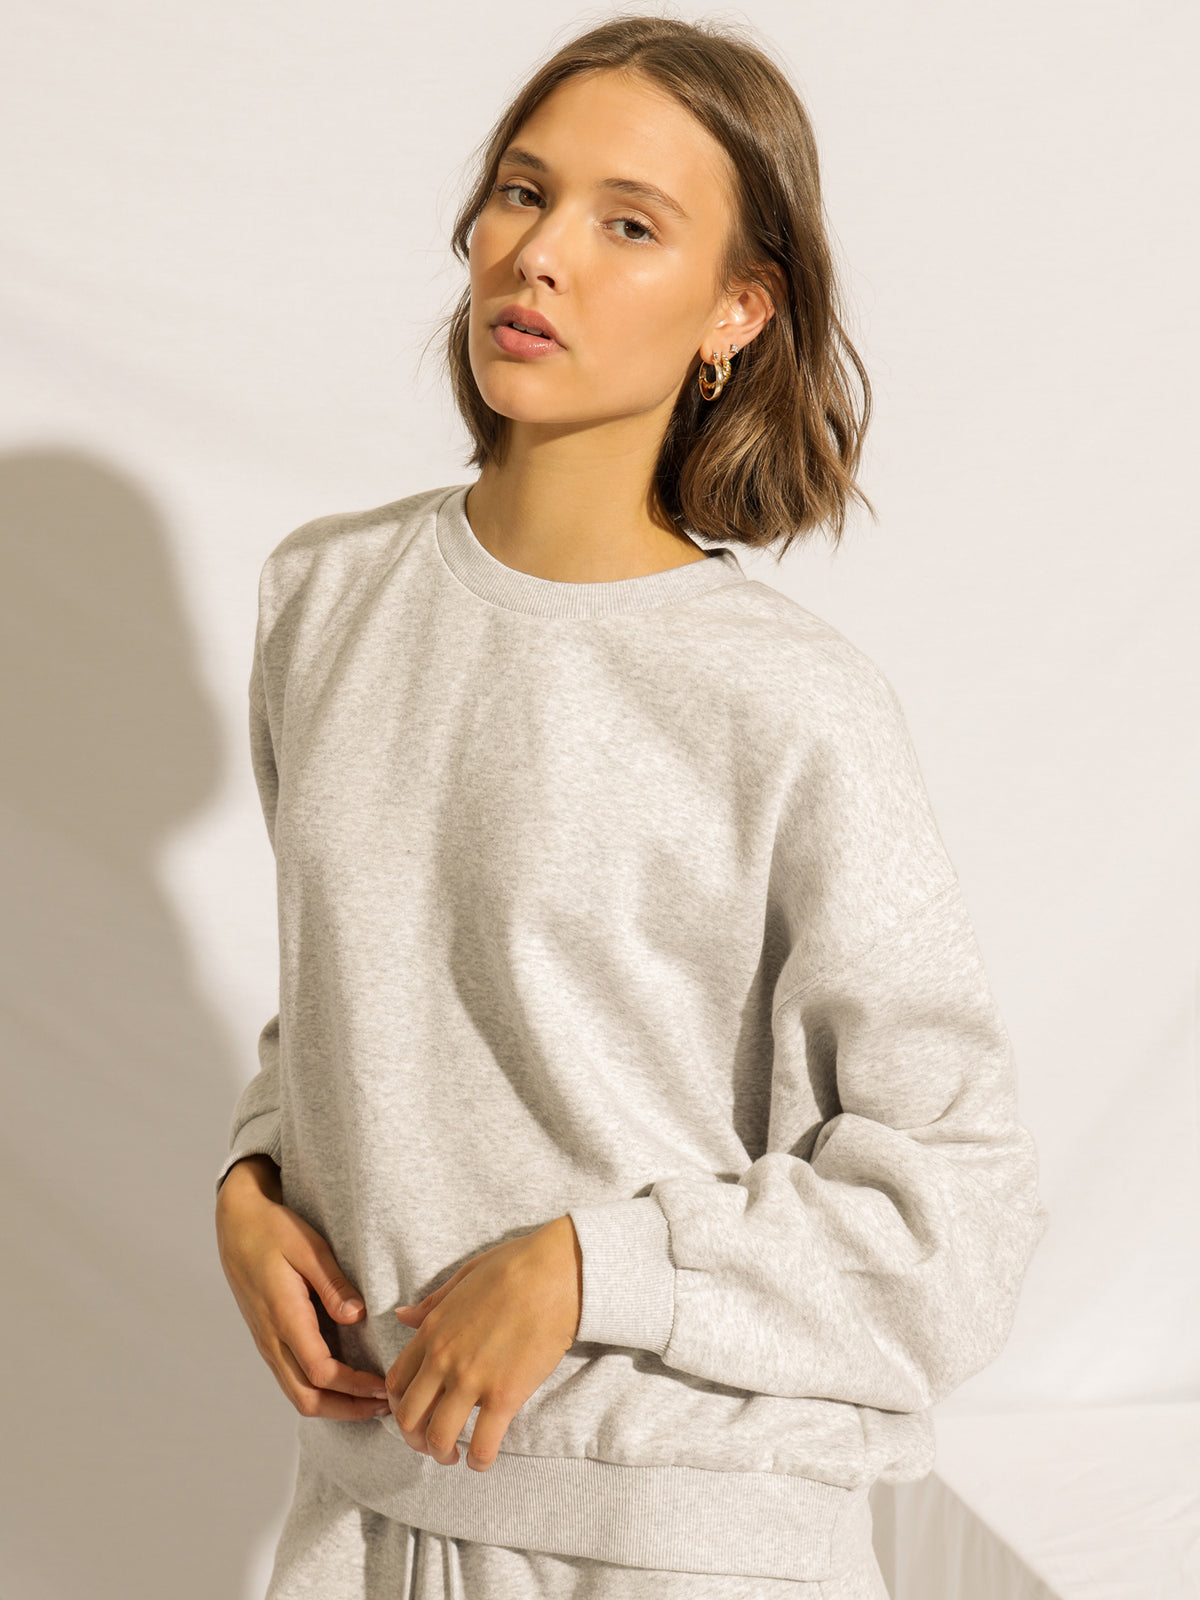 Carter Curated Sweater in Grey Marle